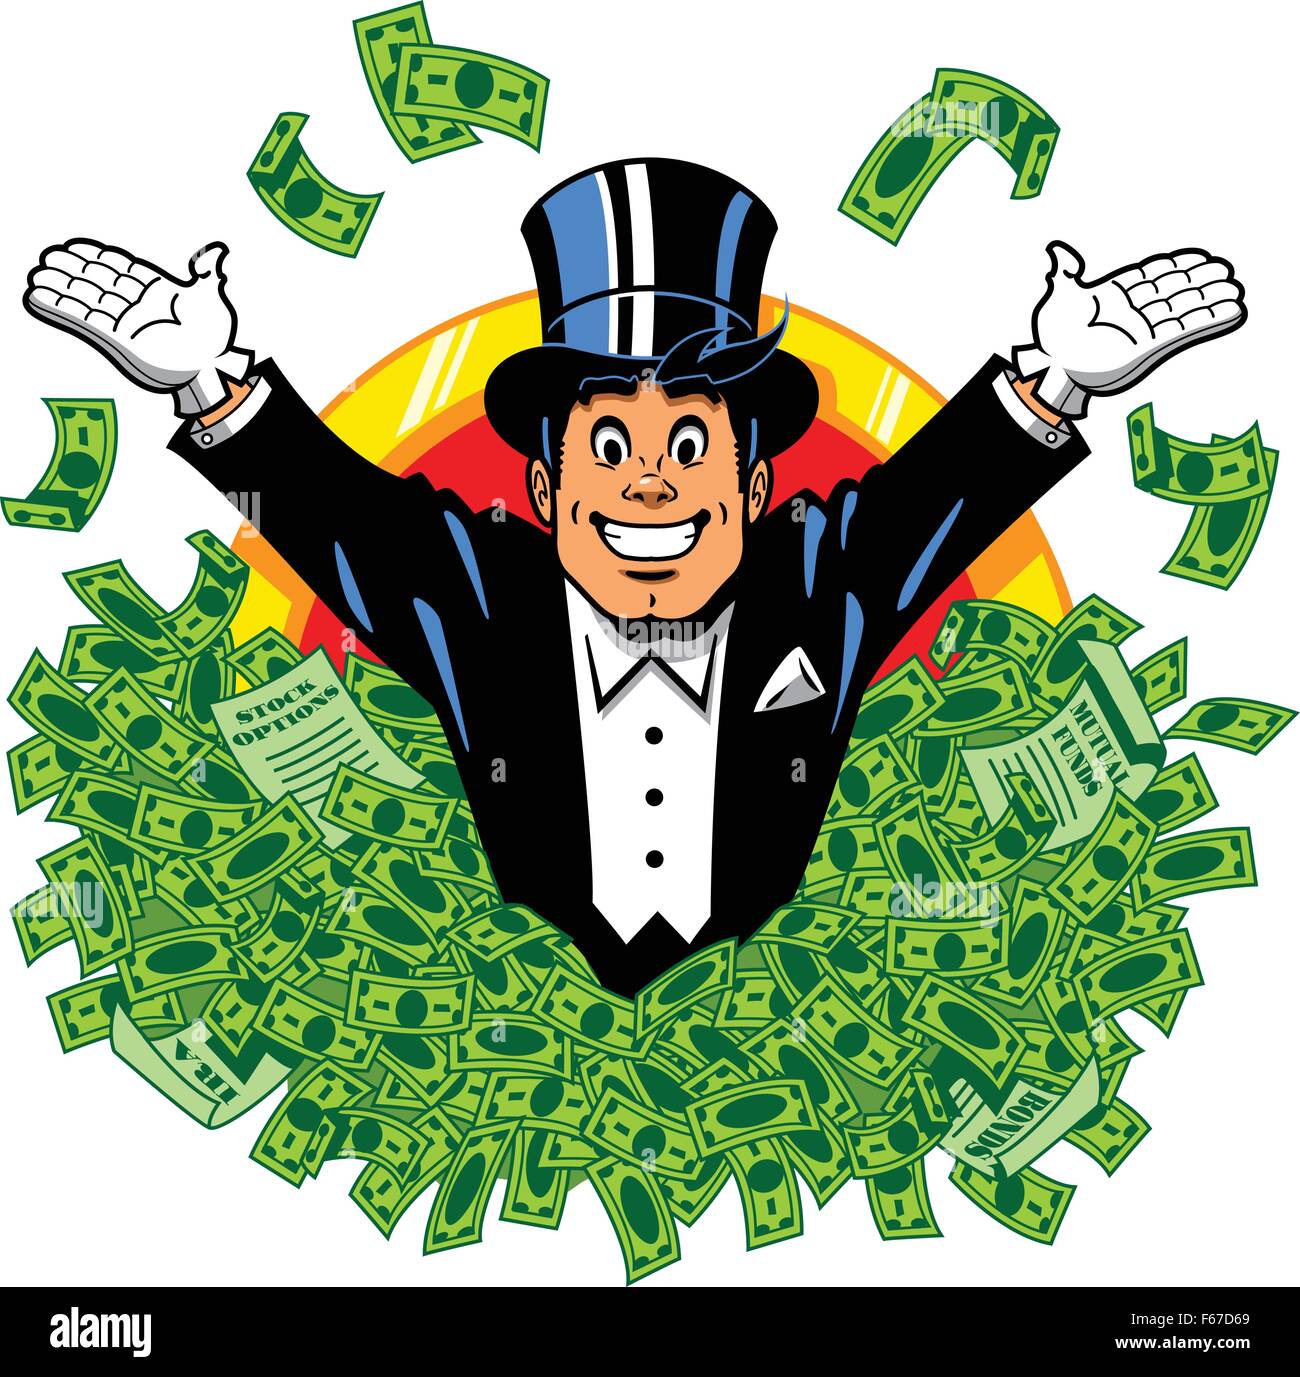 Rich wealthy happy millionaire billionaire with top hat and tuxedo surrounded by money. Stock Vector